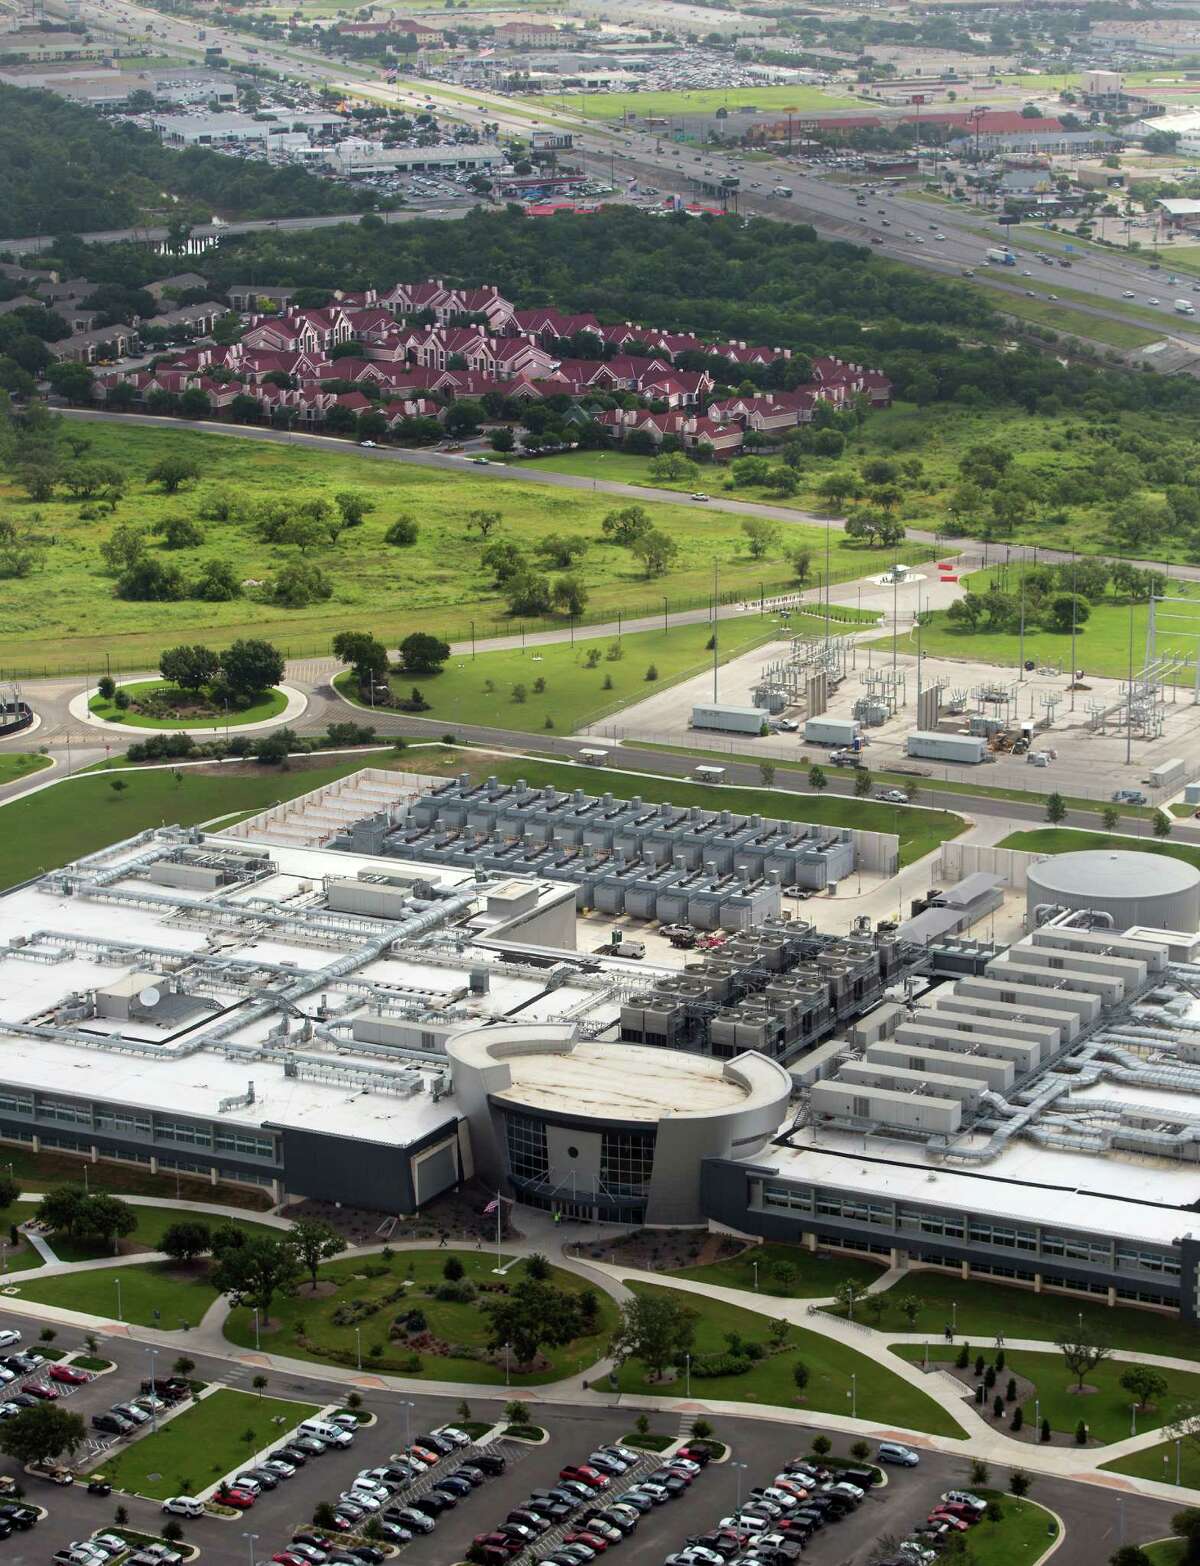 The National Security Agency building in San Antonio is seen in this Thursday June 14, 2013 aerial photo.